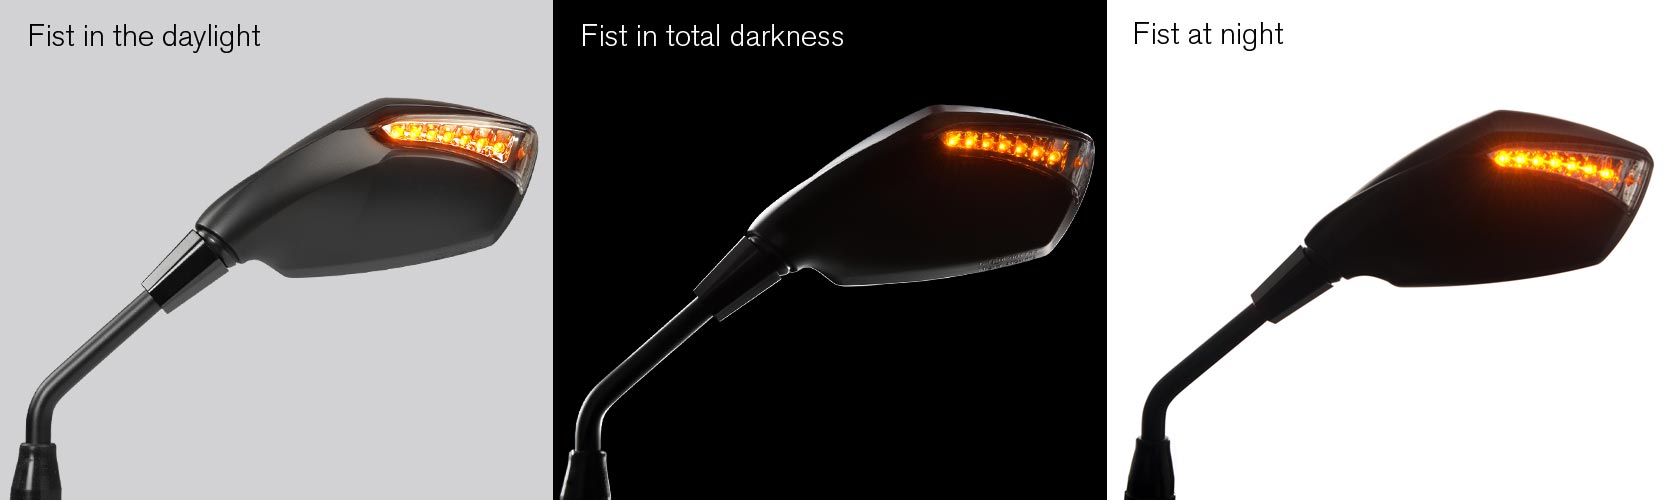 Fist LED Motorcycle mirror turn signal, driving light, in the daylight, at night, in total darkness